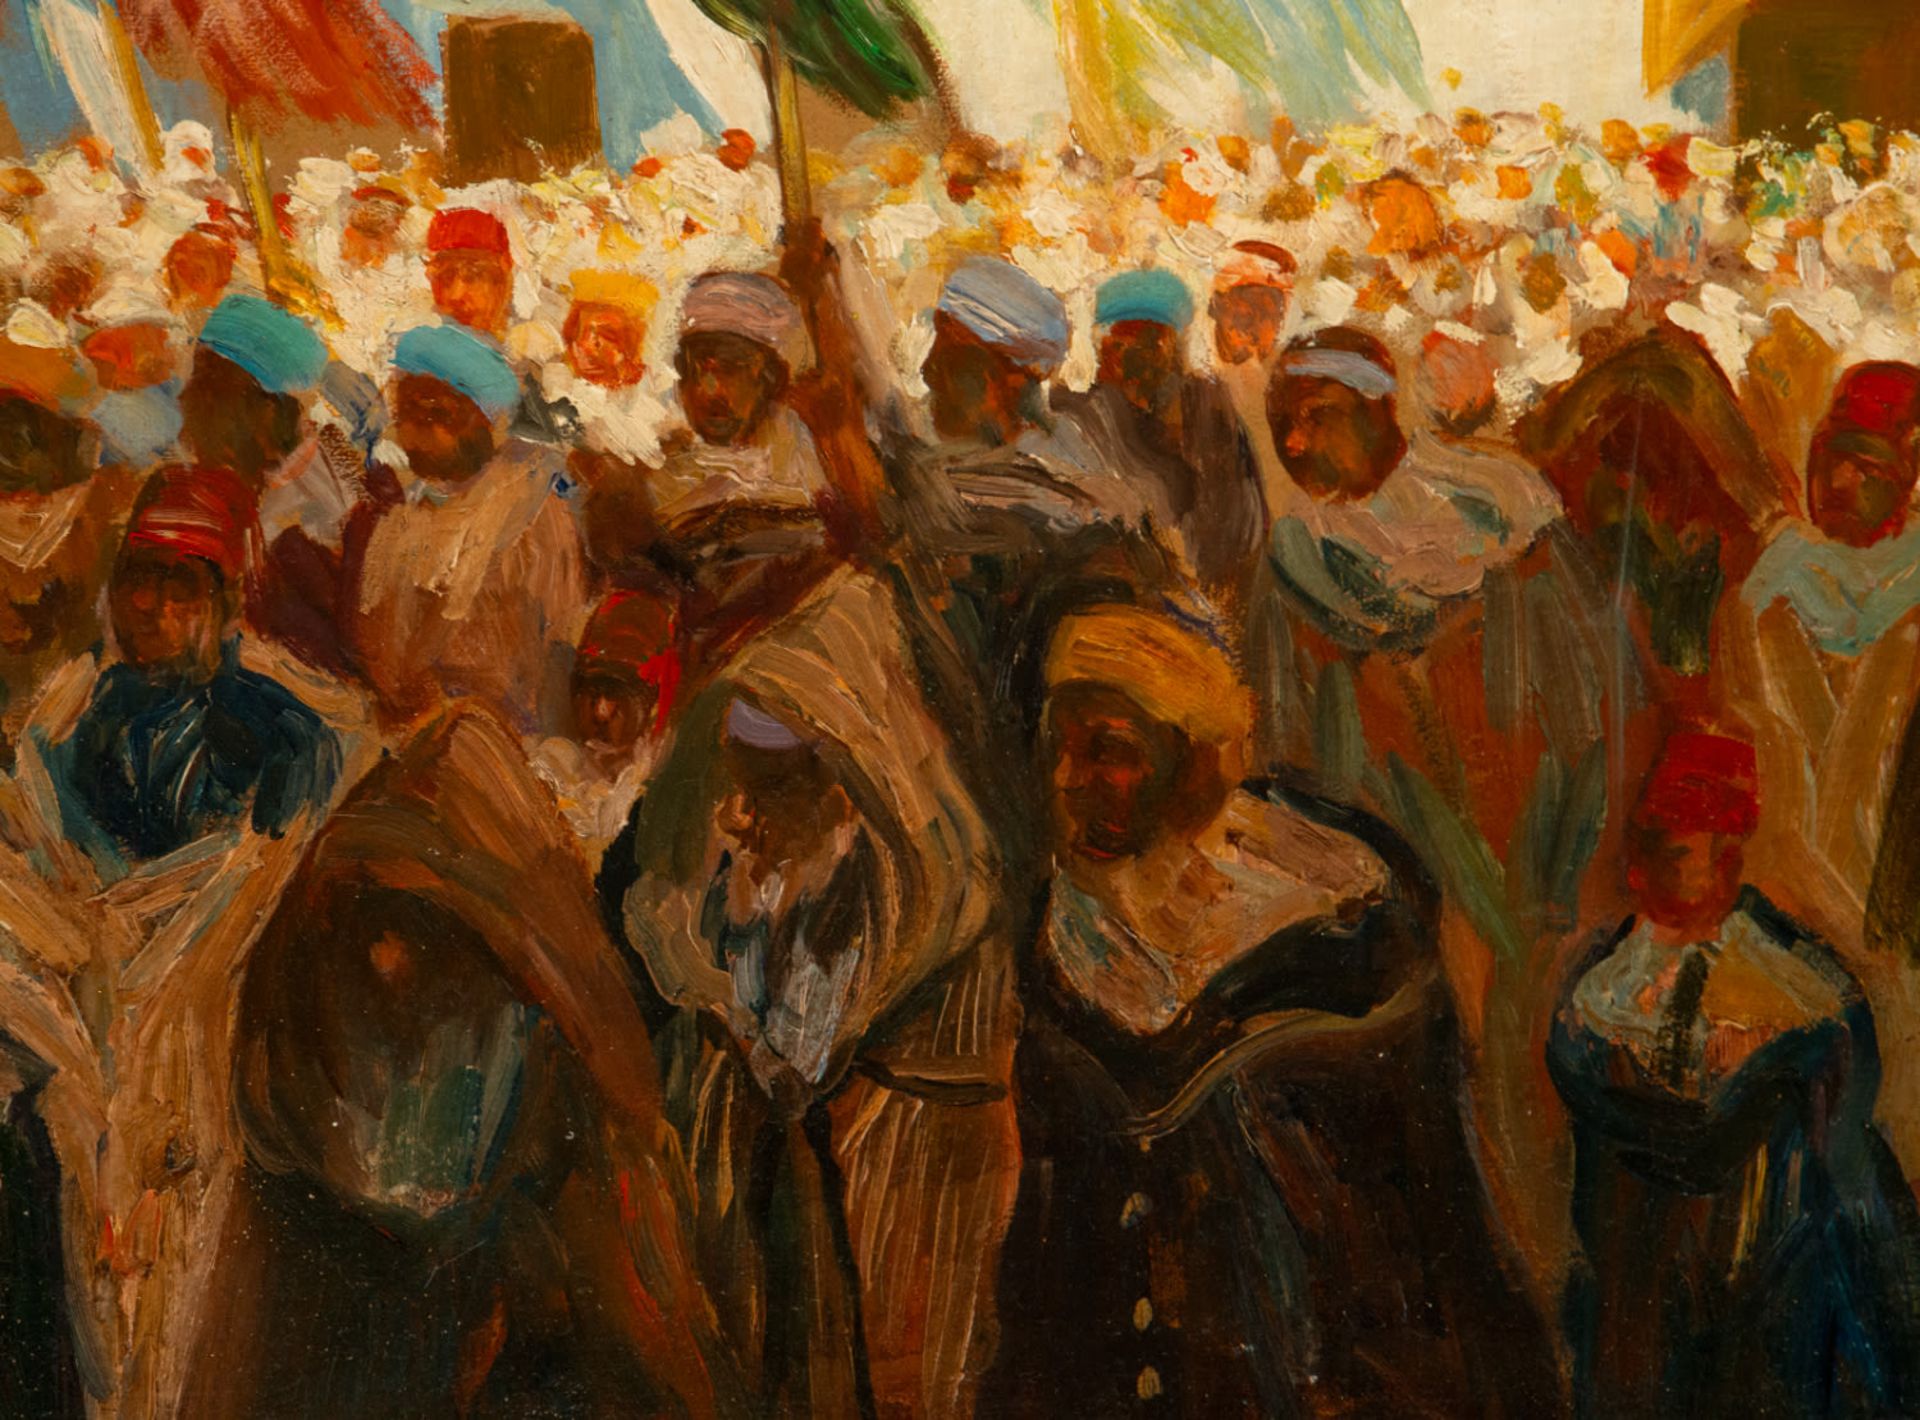 View of Characters in Orientalist Souk, signed, Spanish school of the 19th century - early 20th cent - Bild 3 aus 6